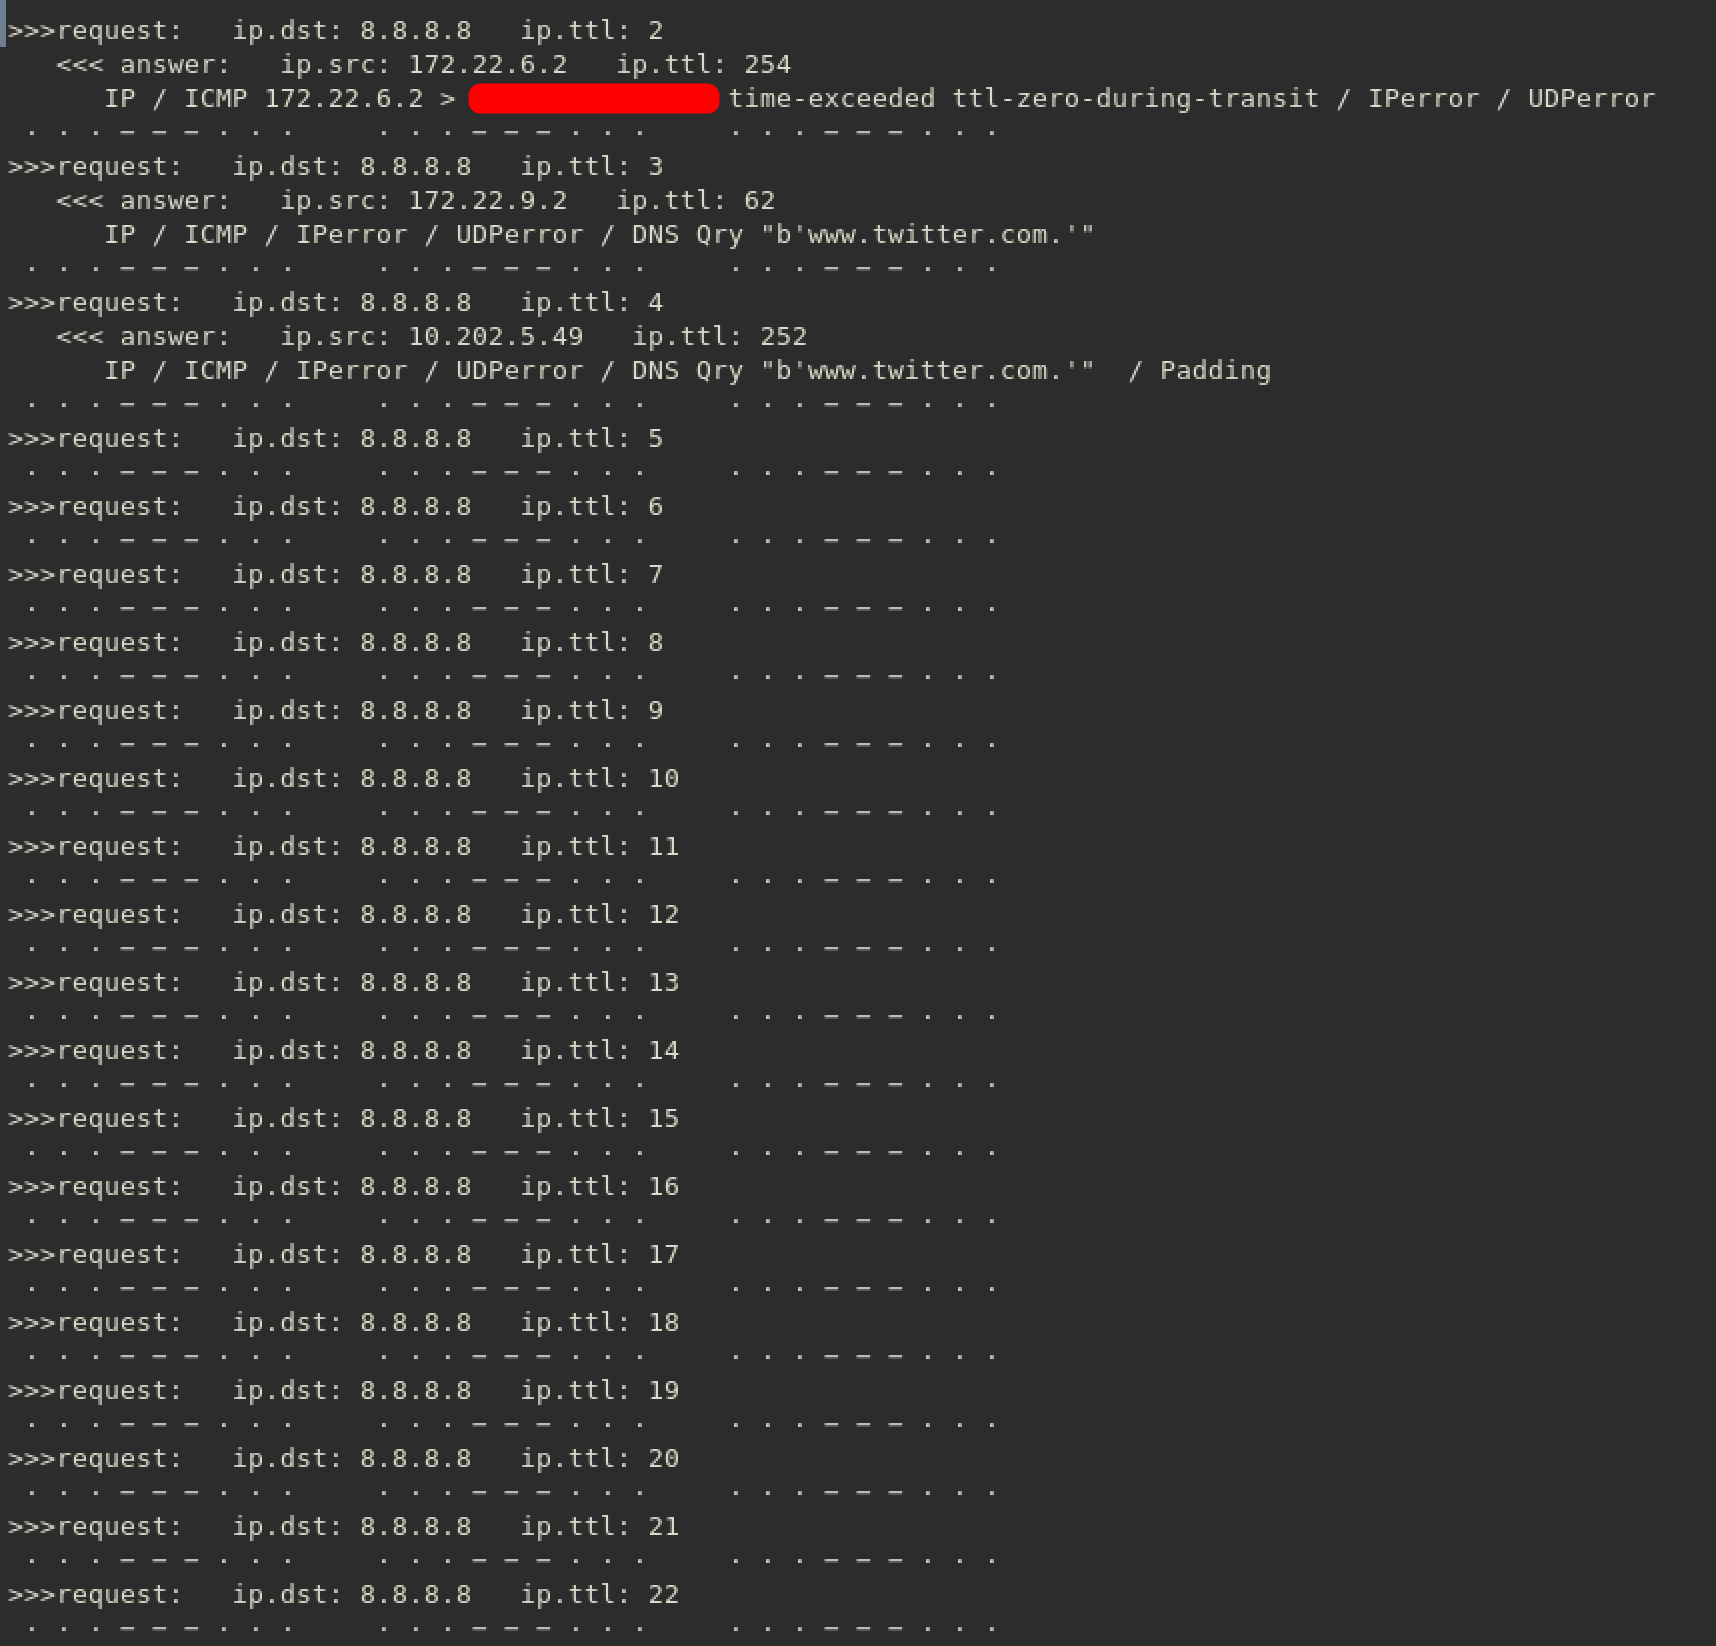 scapy dns over udp 8888 twitter.com